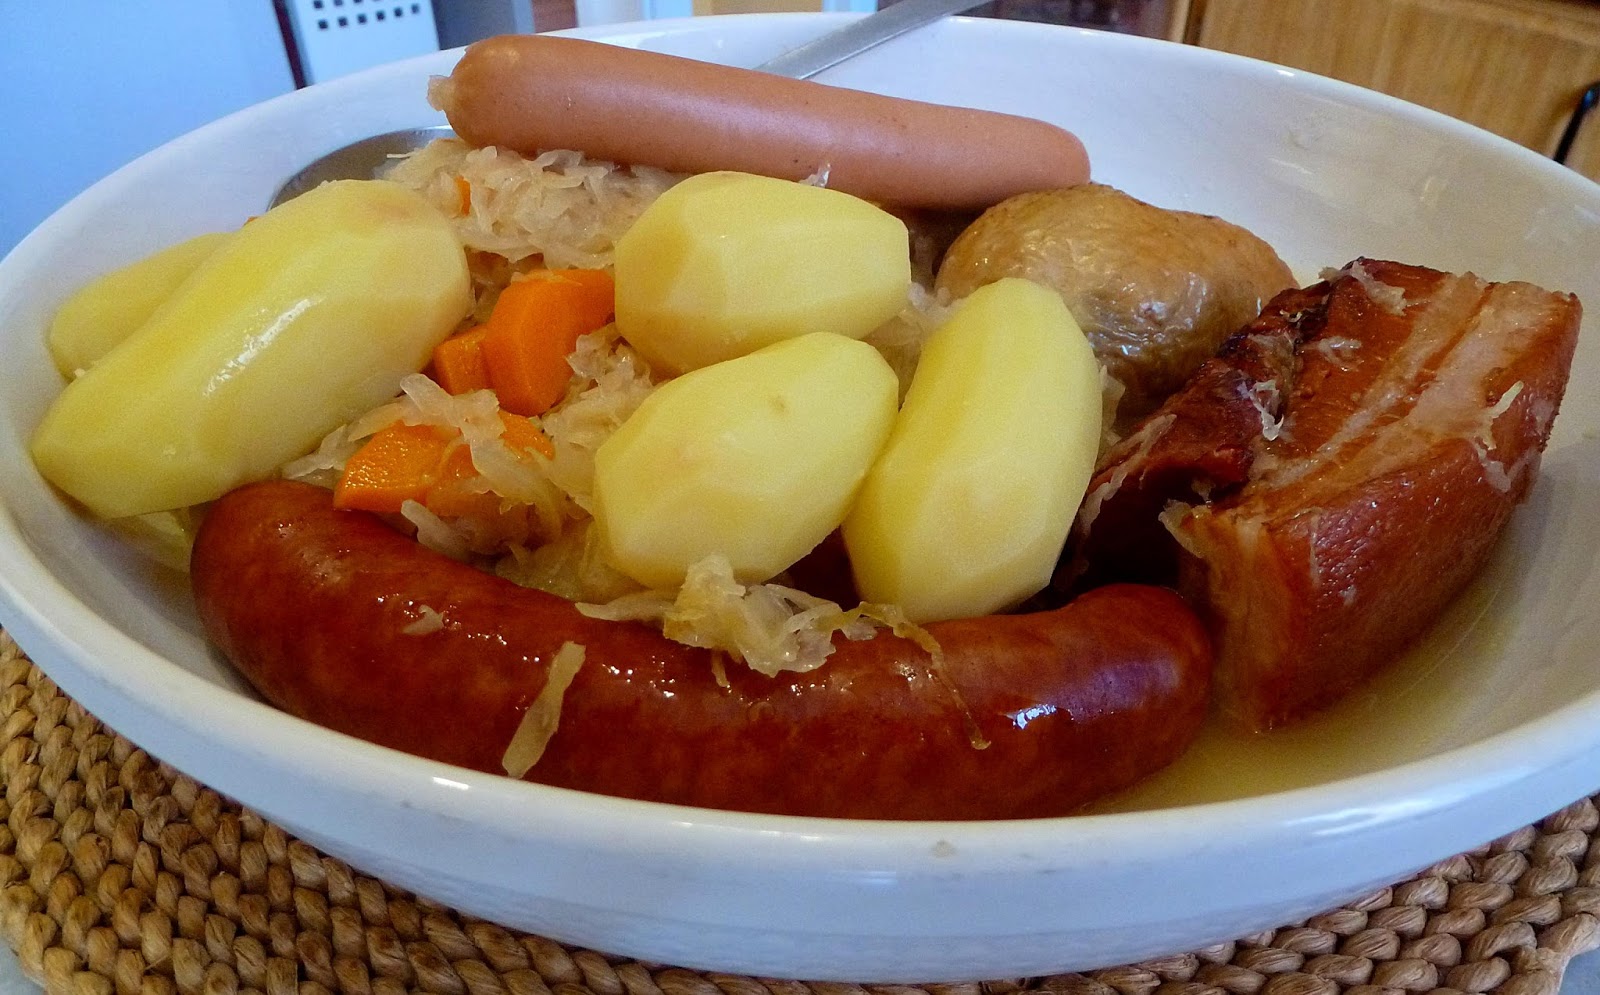 5 minutes to know everything about choucroute, Alsatian sauerkraut